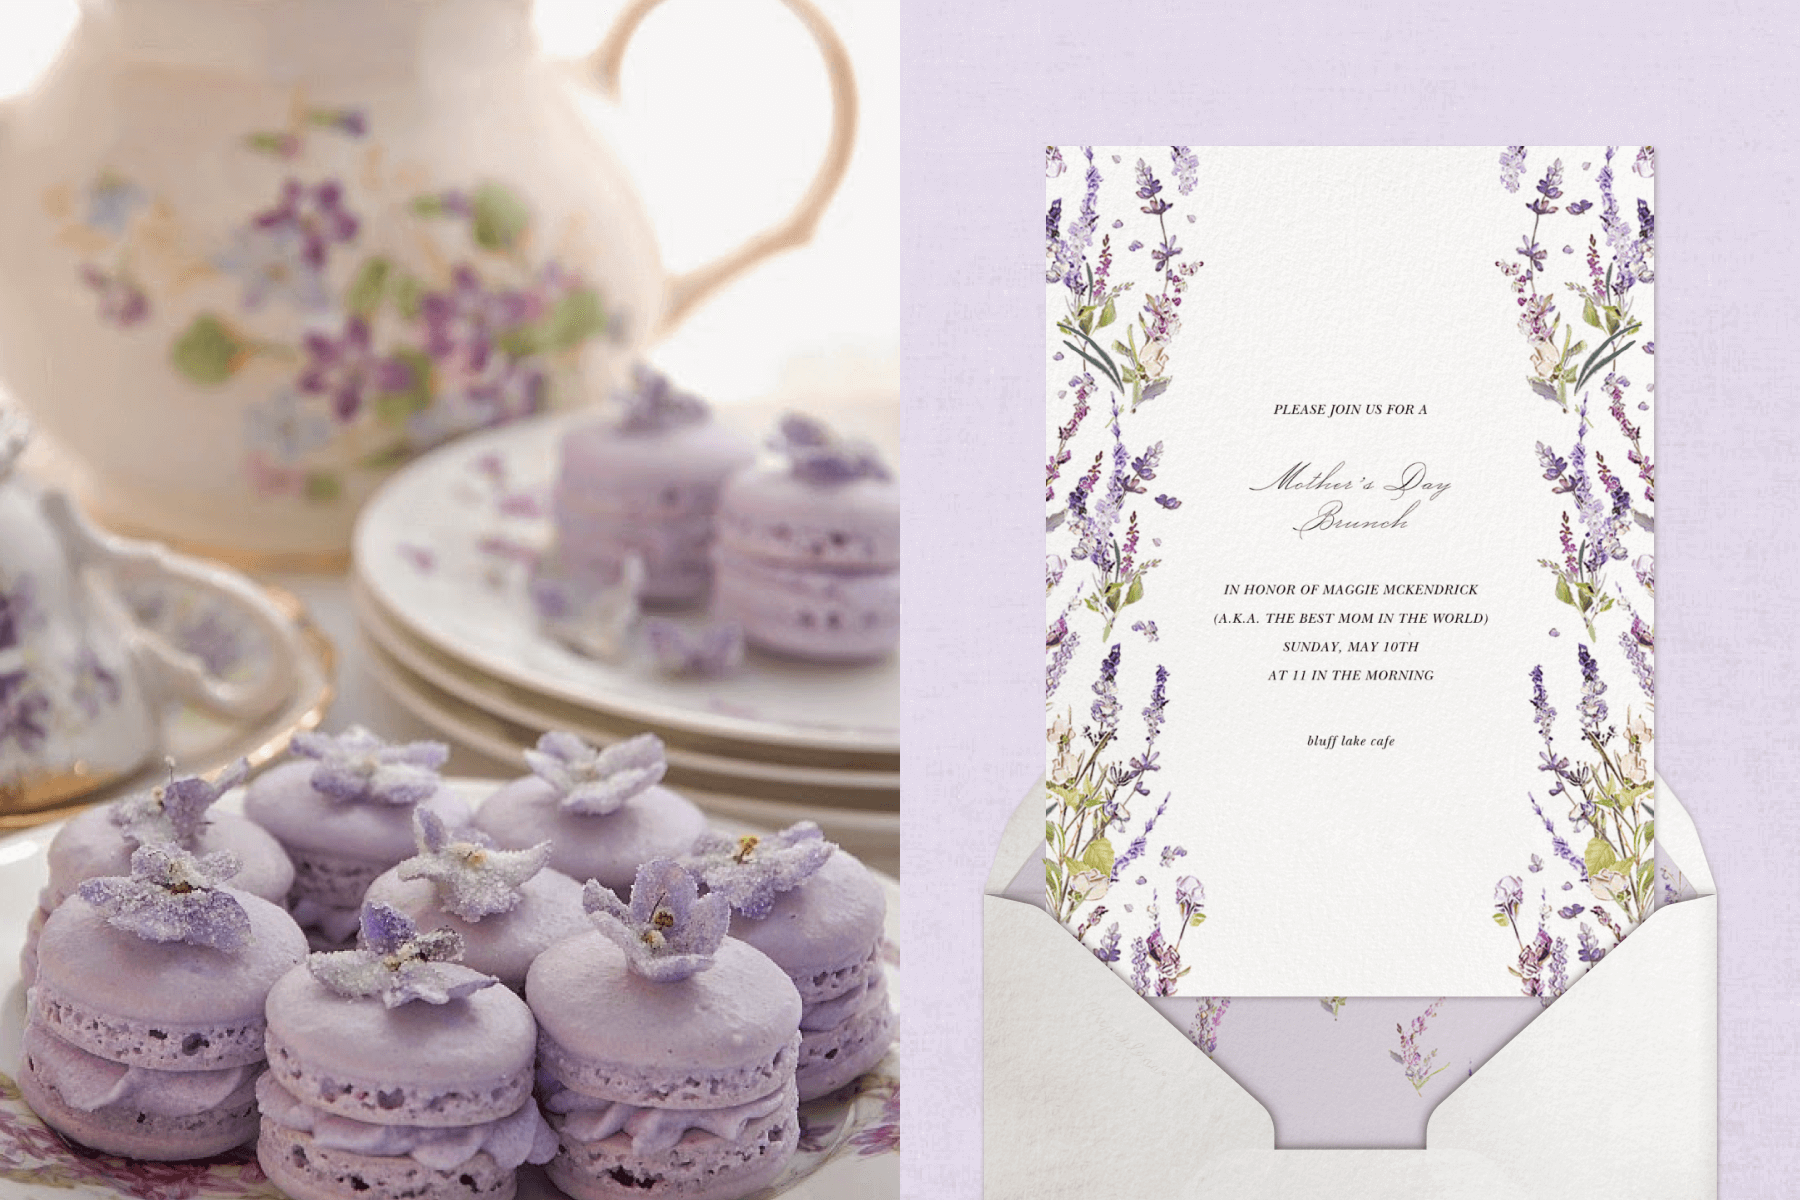 Light purple macarons with floral dishes and a pitcher; an invitation with a border of lavender flowers.